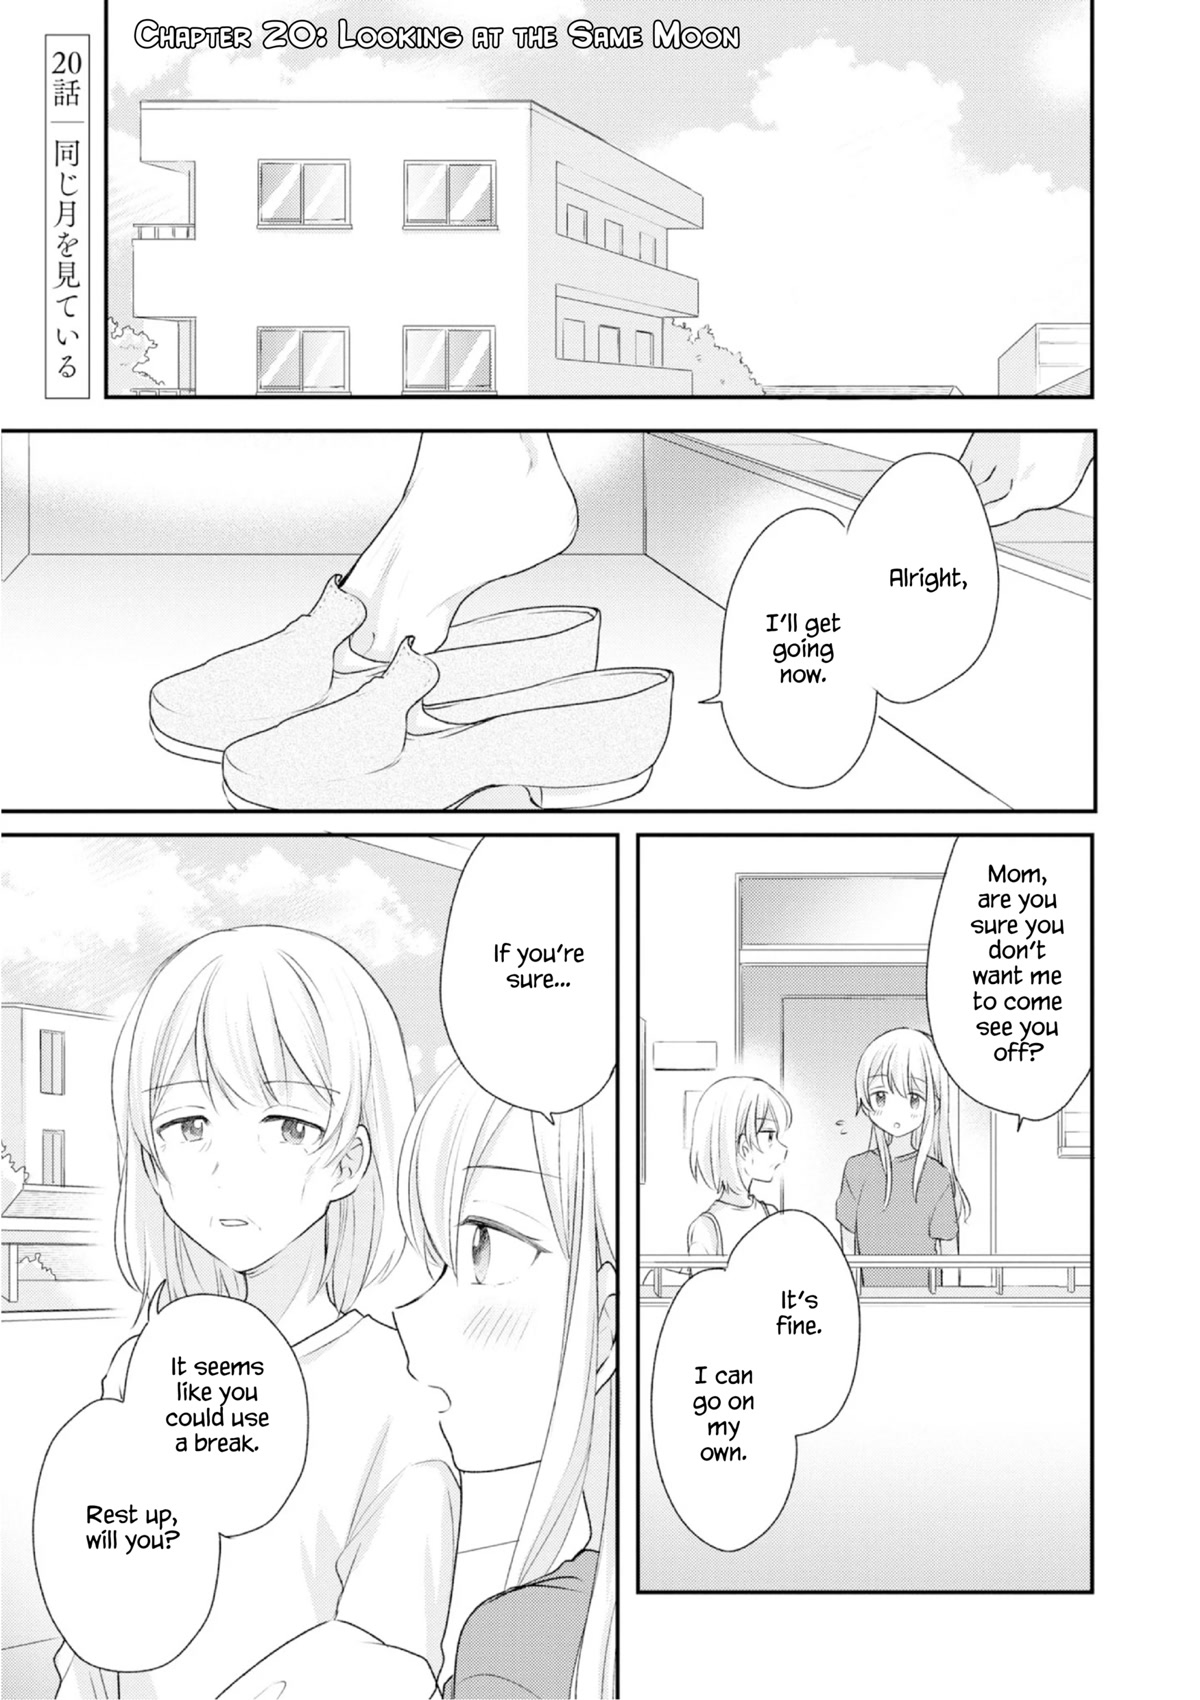 Crescent Moon And Doughnuts Chapter 20: Looking At The Same Moon [End] - Picture 1